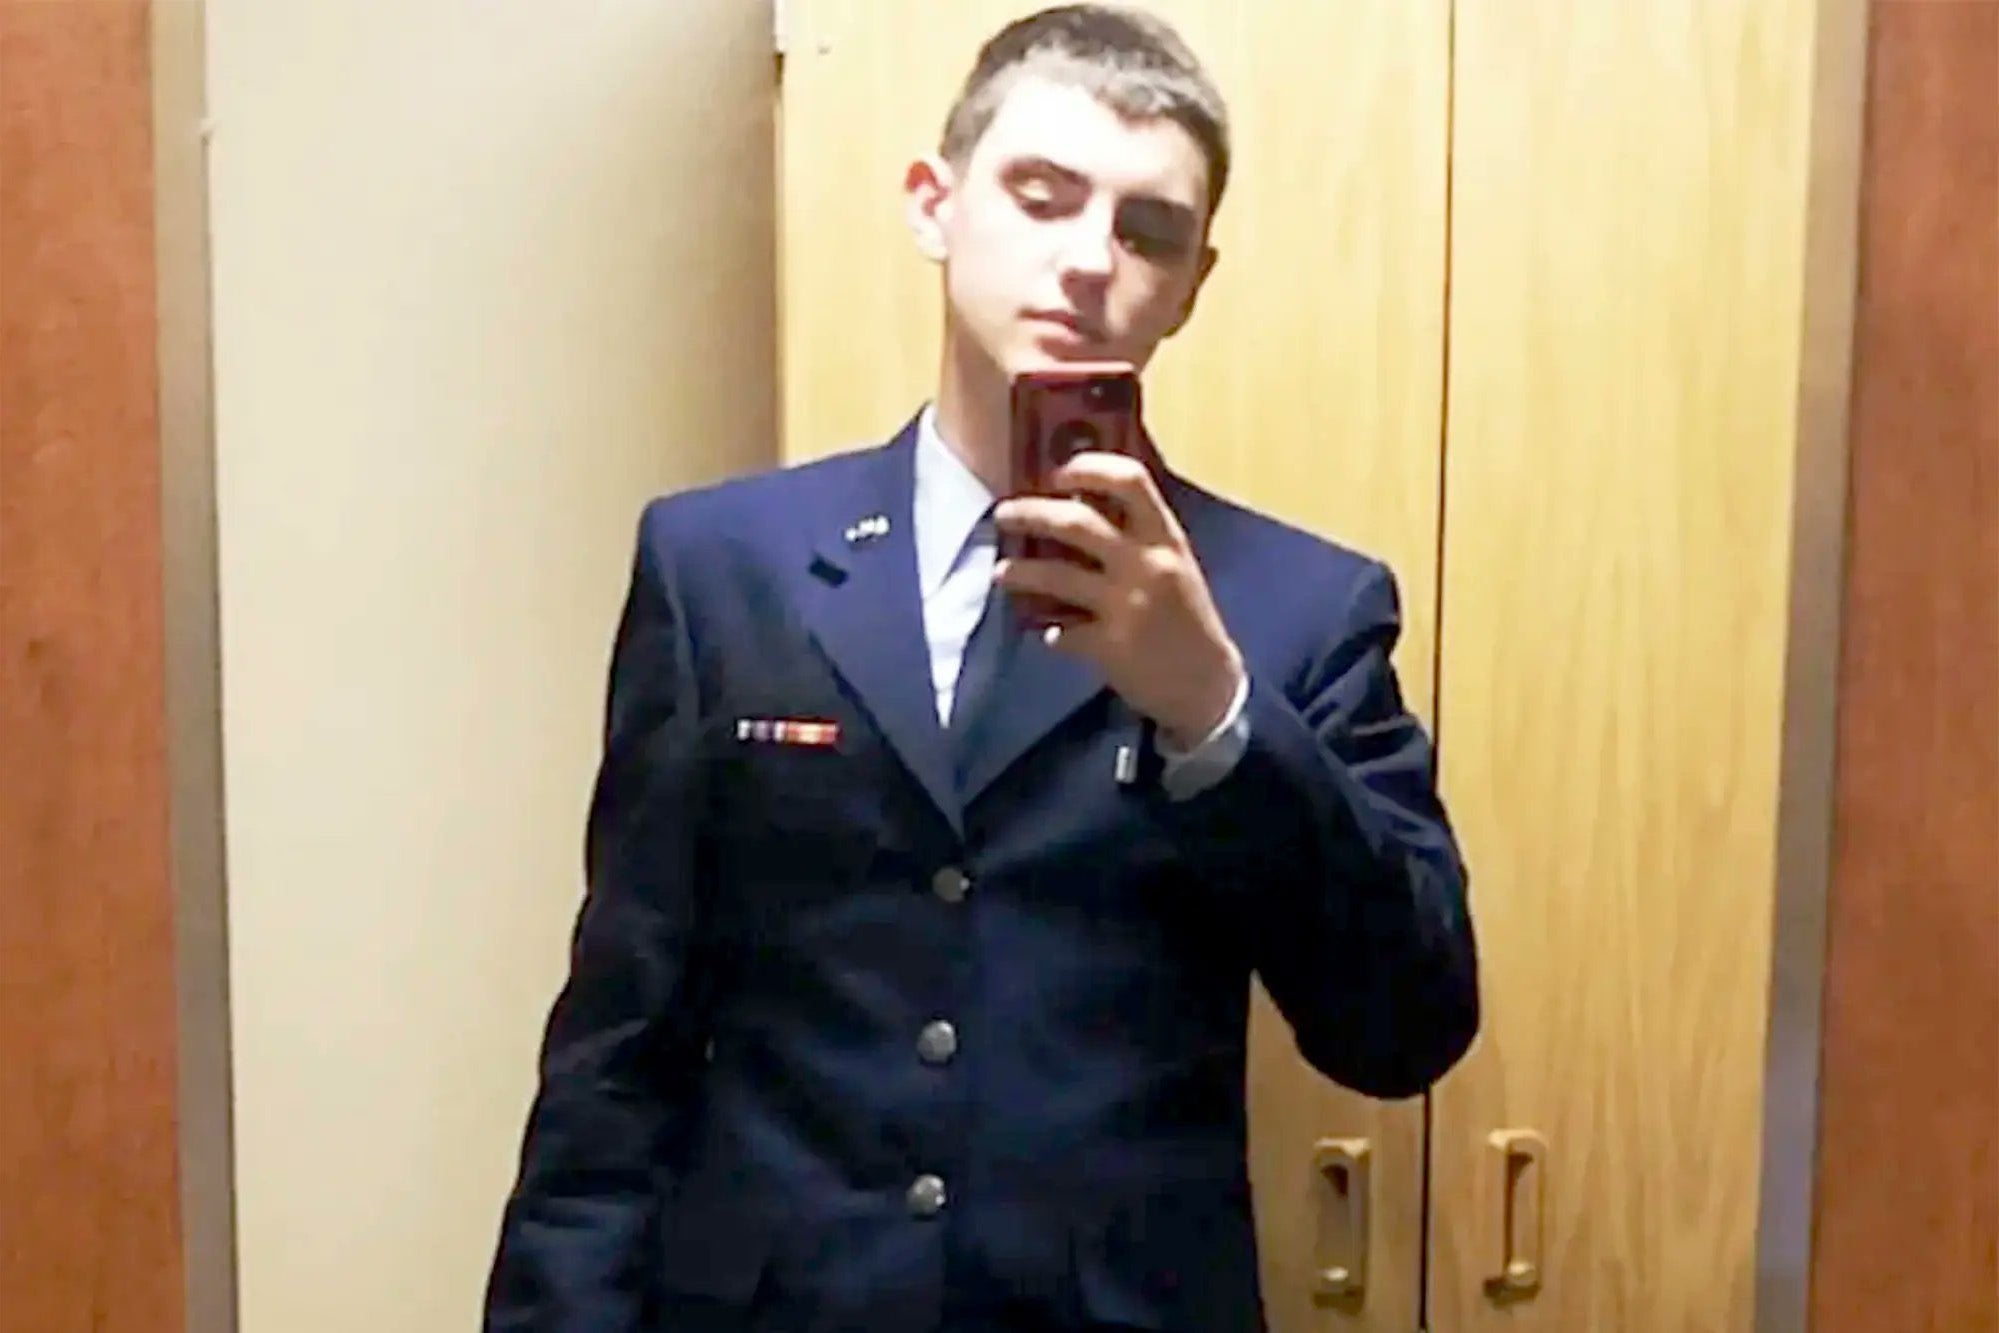 A young man with light skin and brown hair, wearing a navy blue airman's uniform, takes a mirror selfie with a cell phone.